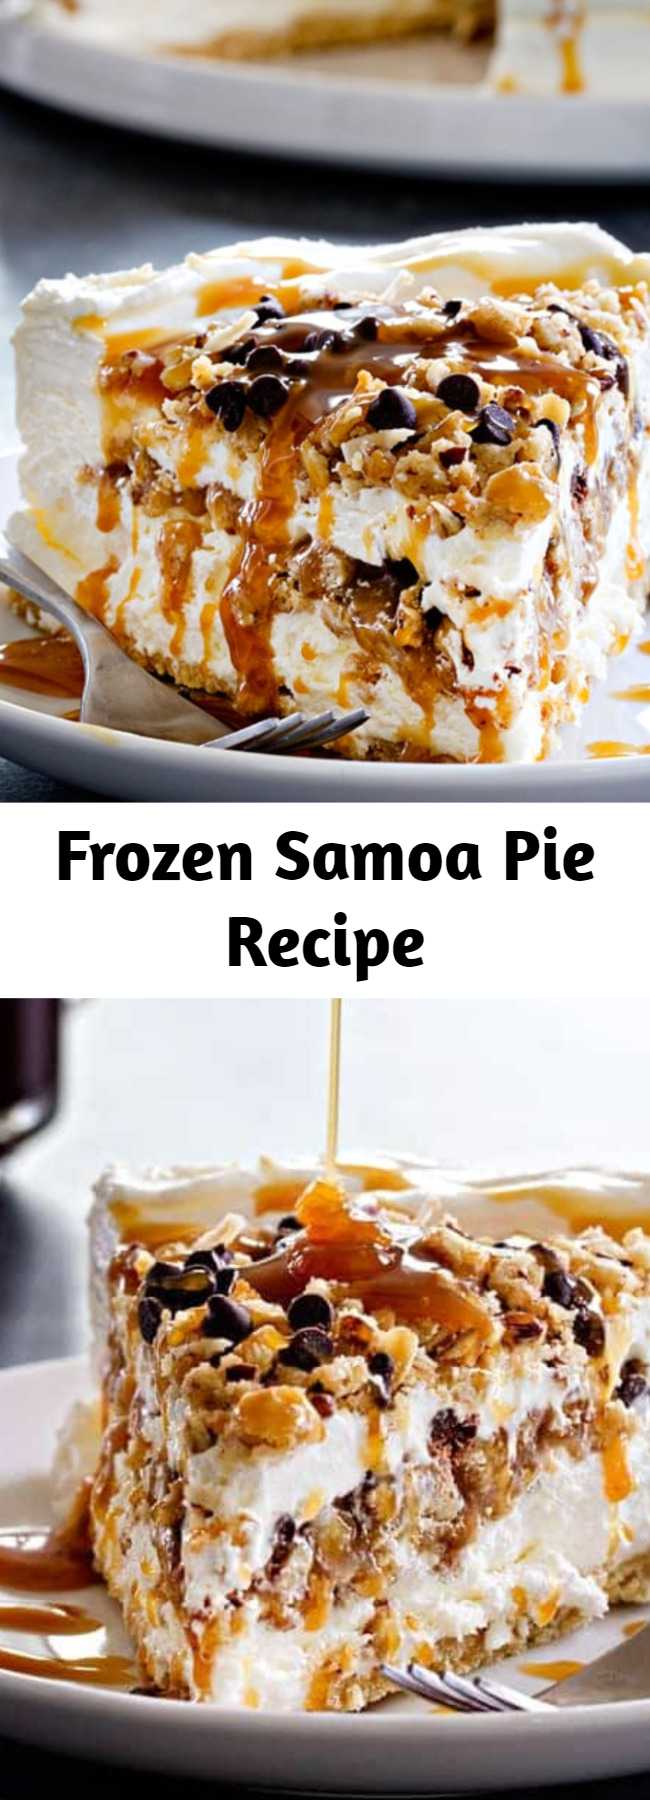 Frozen Samoa Pie Recipe - Frozen Samoa Pie is pretty much a chocolate-caramel-coconut lover’s dream. Layers upon layers of those delectable flavors, in one frozen treat! This is the cold treat you crave on a hot day... You won't be disappointed!